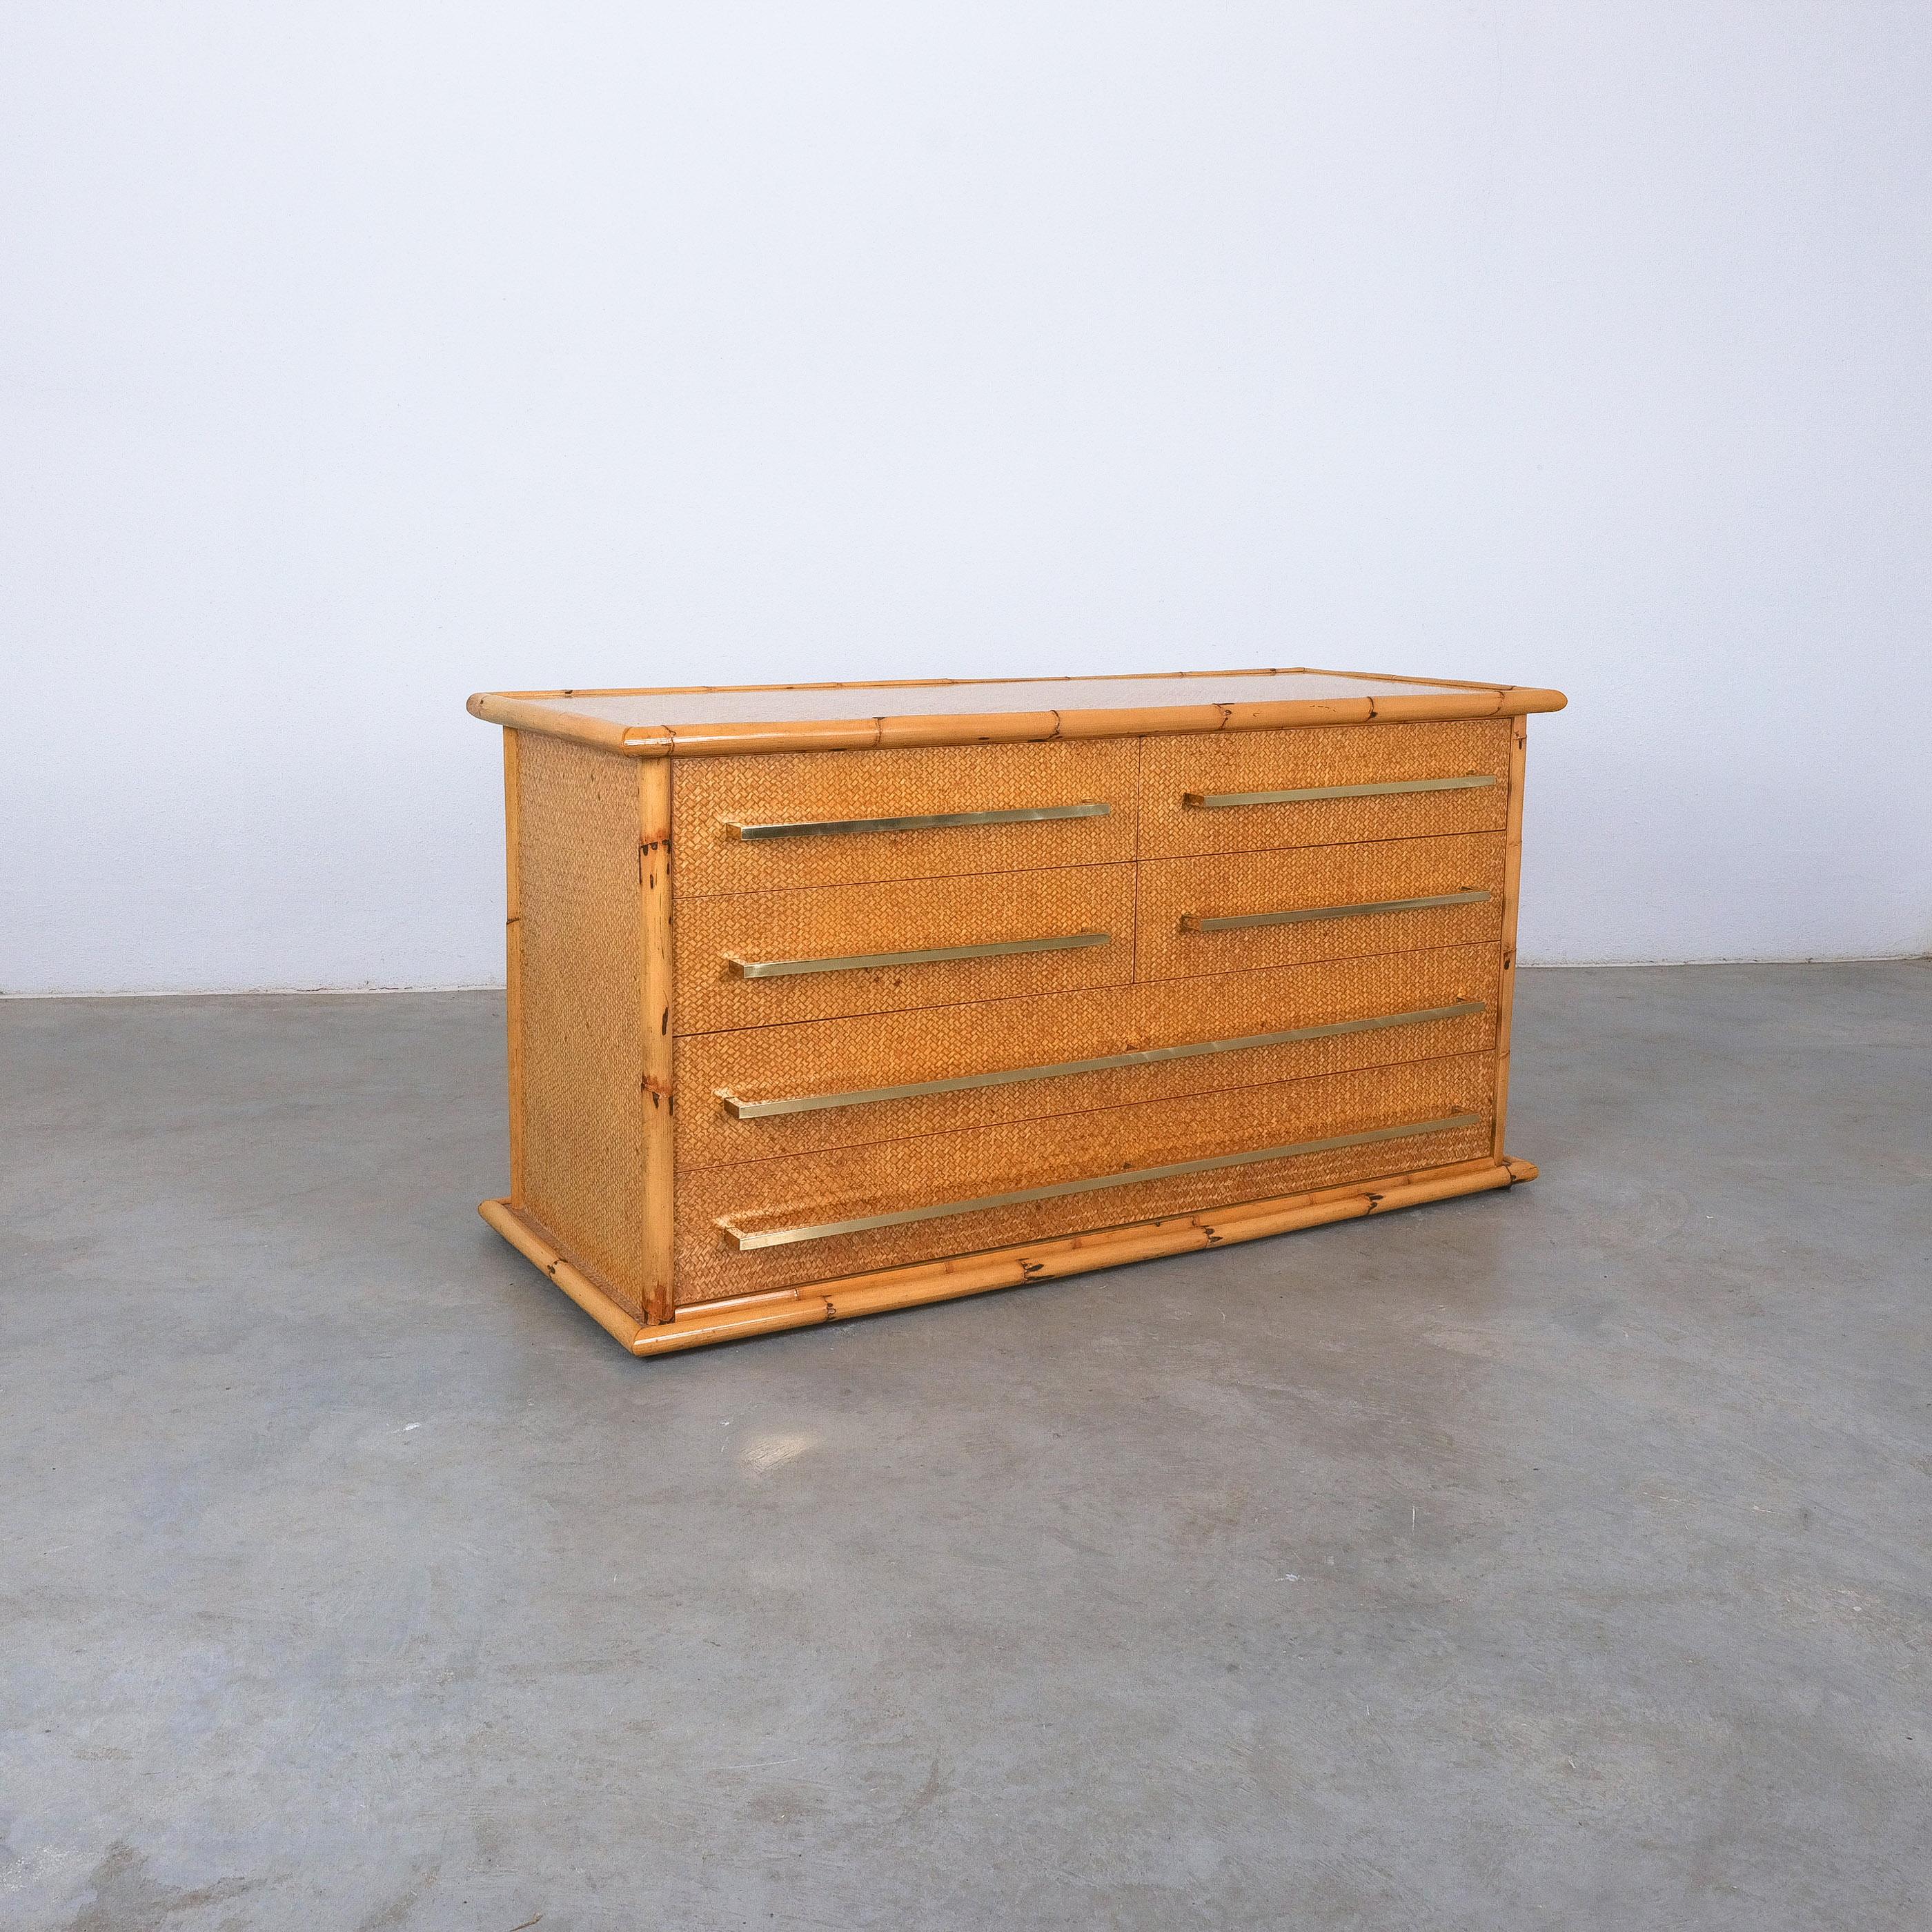 Bamboo Cane and Brass Commode Chest of Drawers by Vivai del Sud, Italy, 1975 For Sale 2